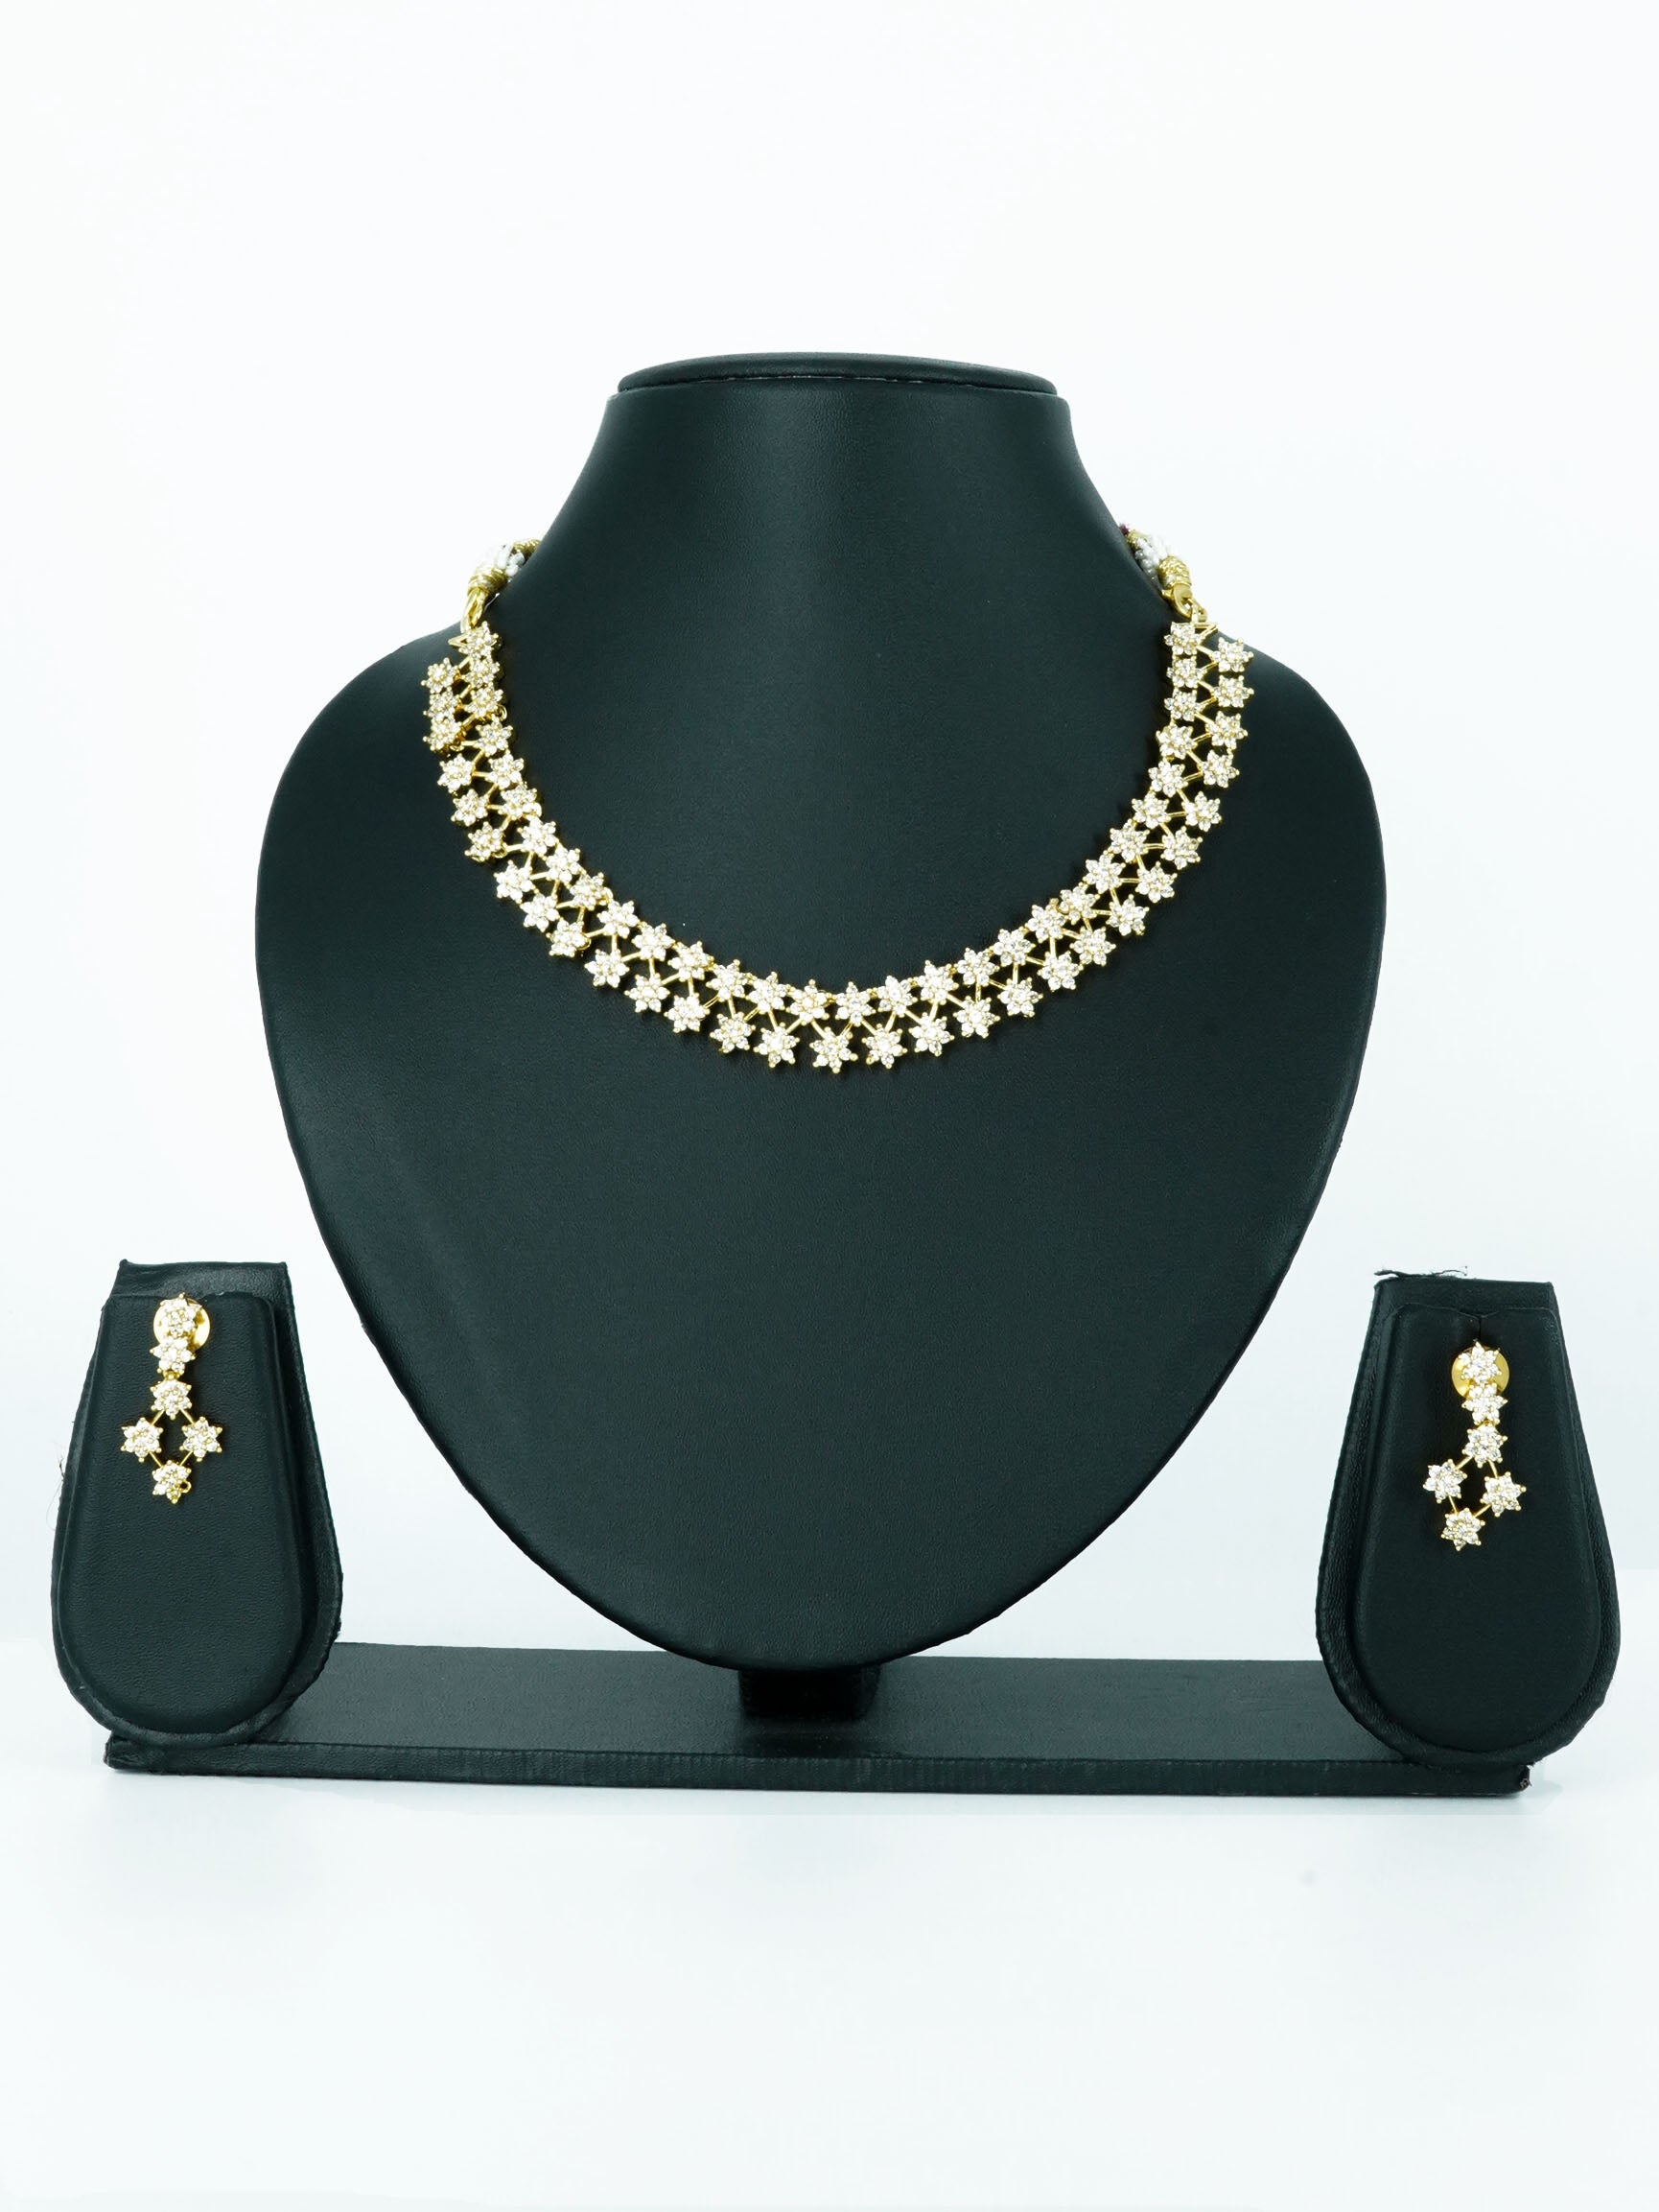 Premium Gold Finish Sayara Collection Bestseller Star Necklace with CZ Stones in diff colours 12798N